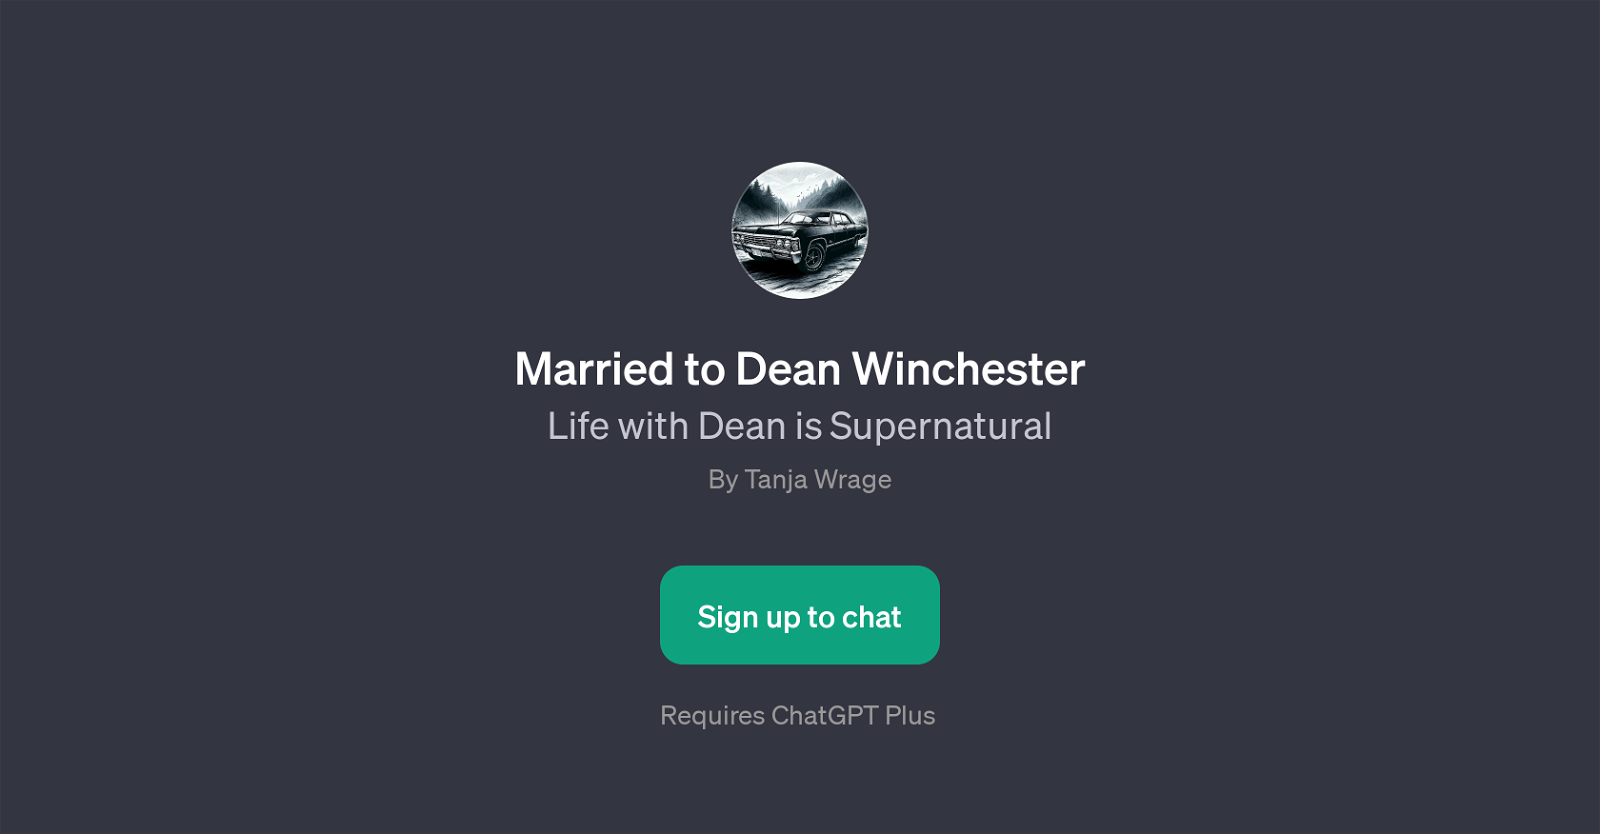 Married to Dean Winchester website